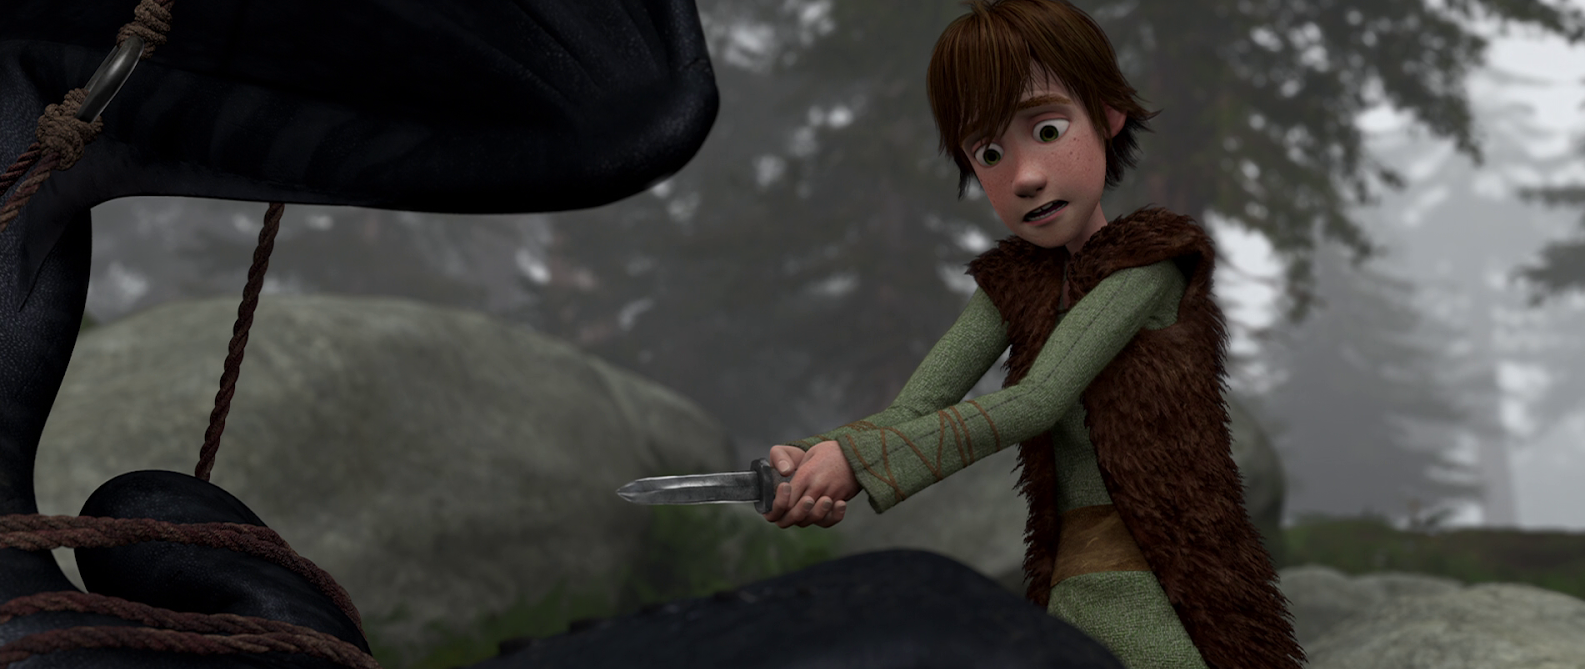 Hiccup has trouble deciding whether to kill the Night Fury or set it free